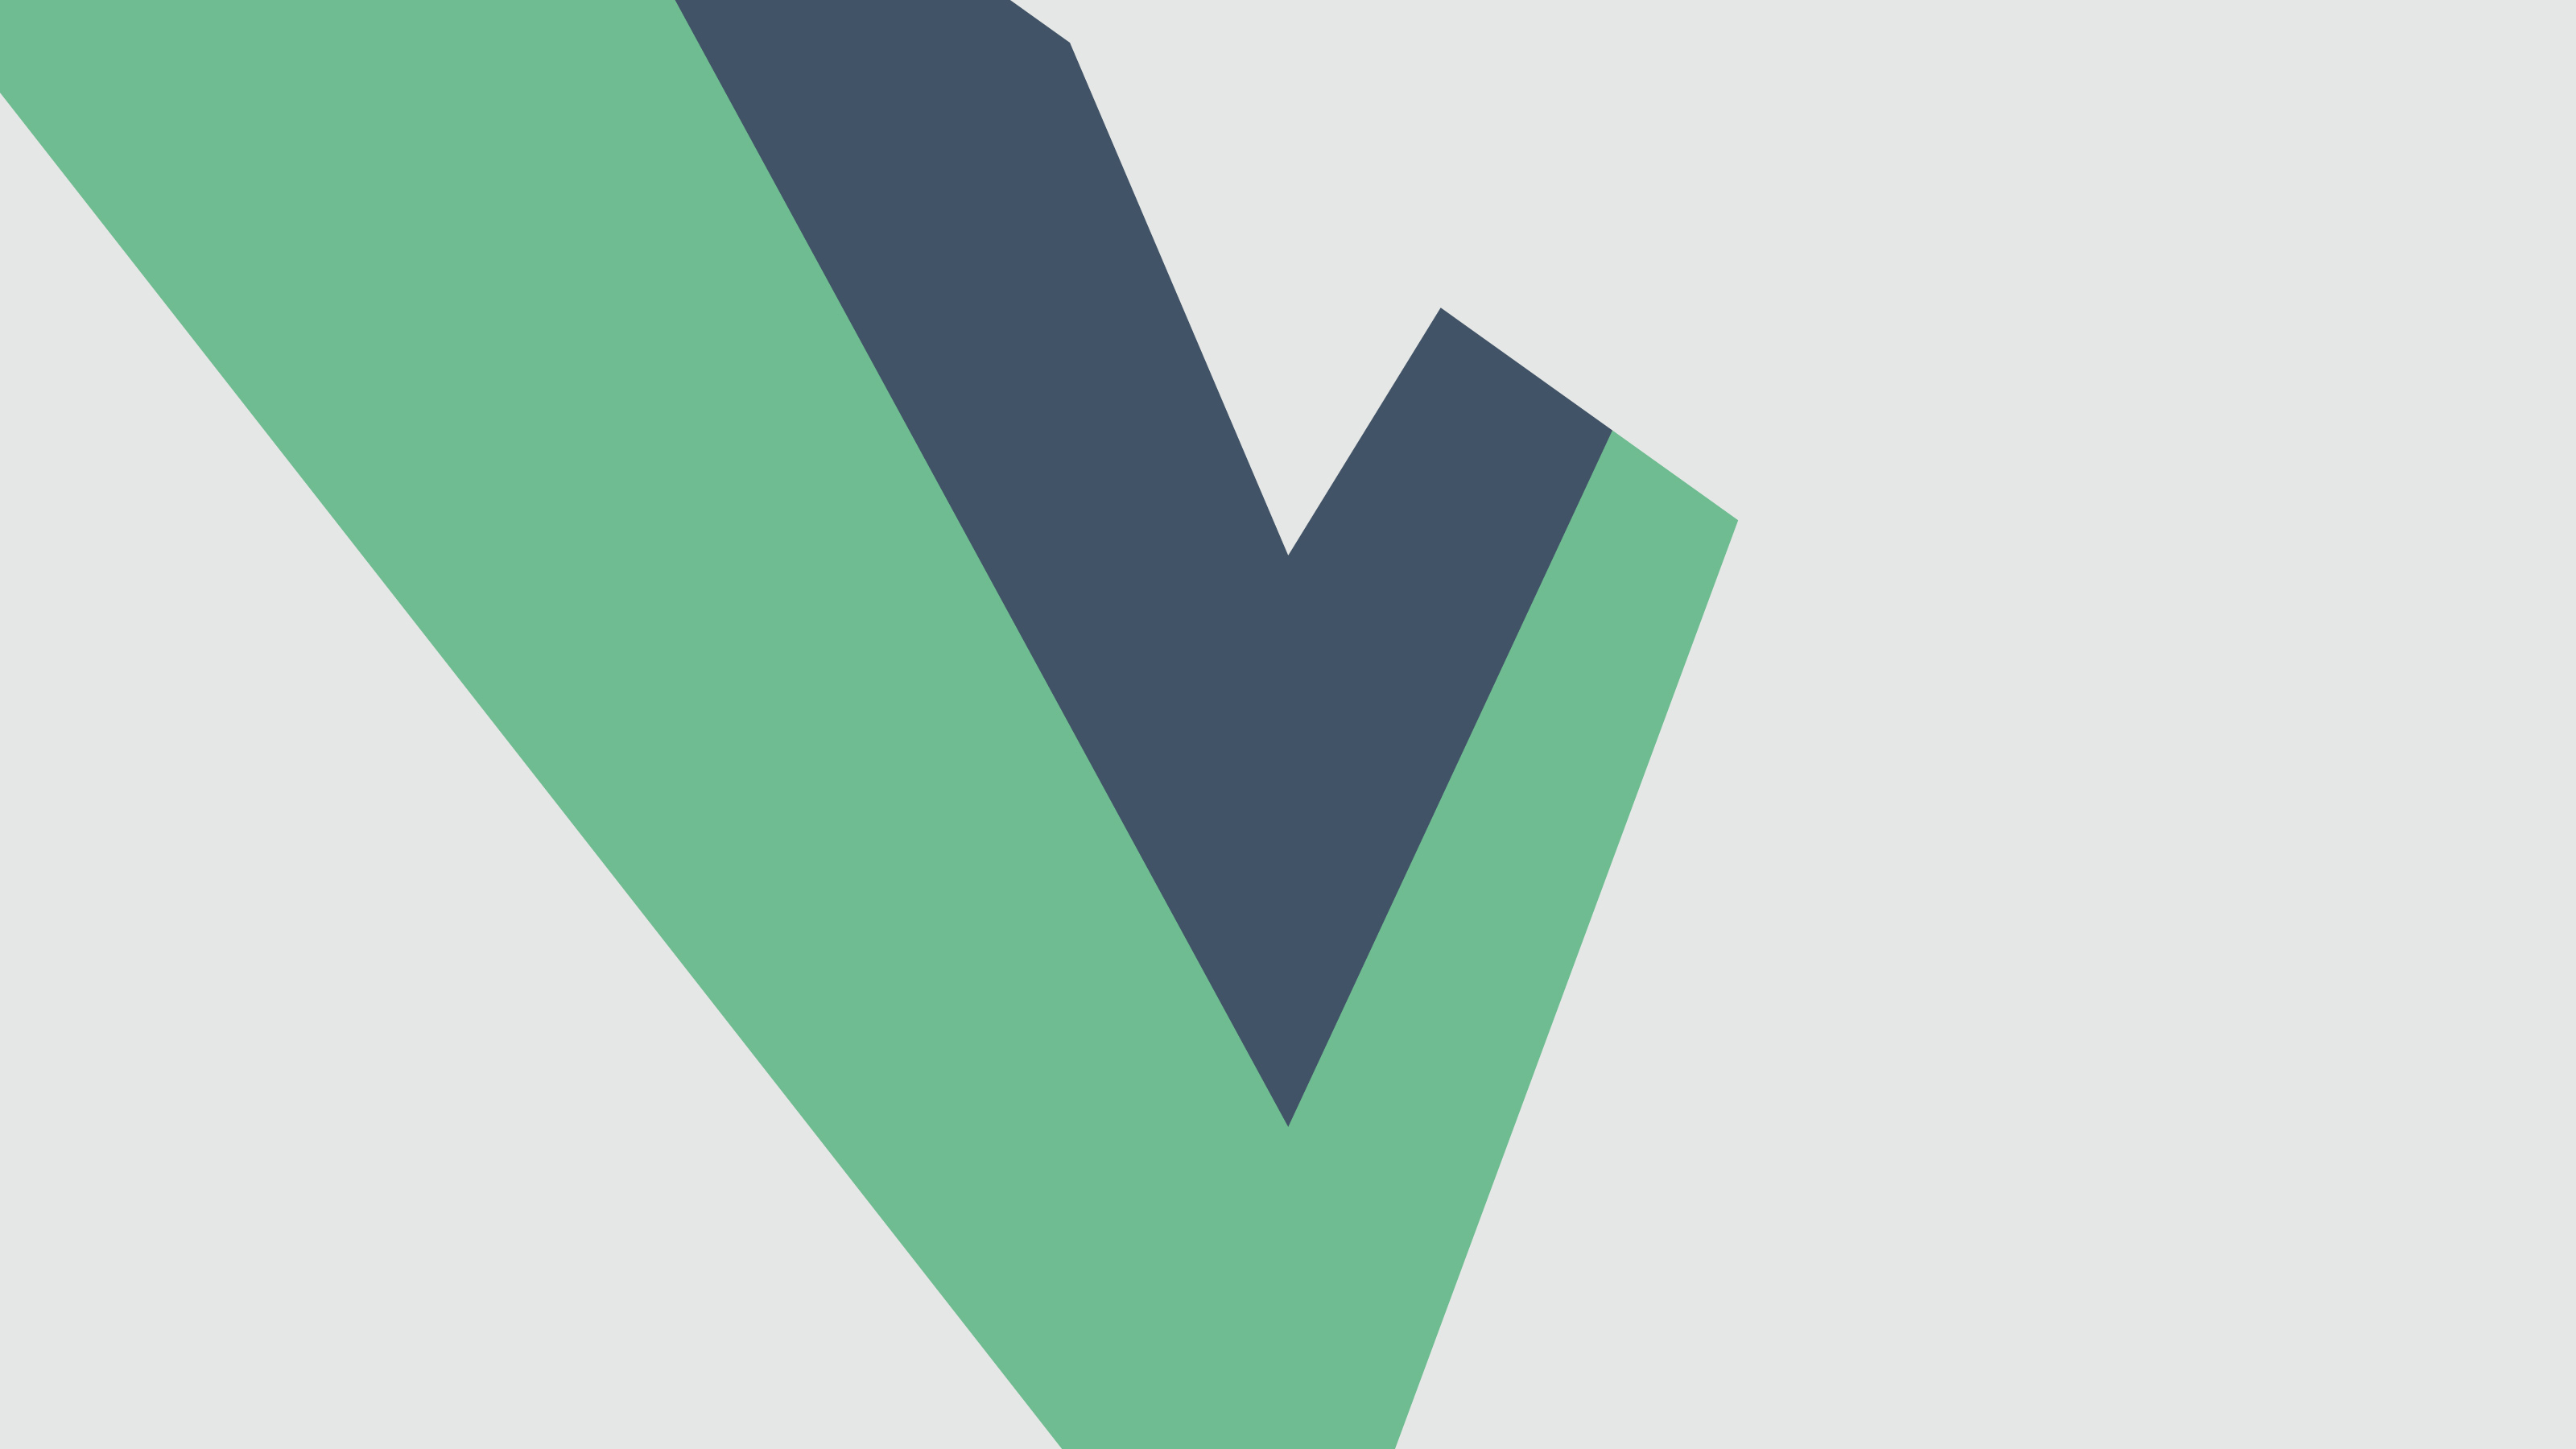 Vue.js: 30 useful intros, websites, newsletters and books